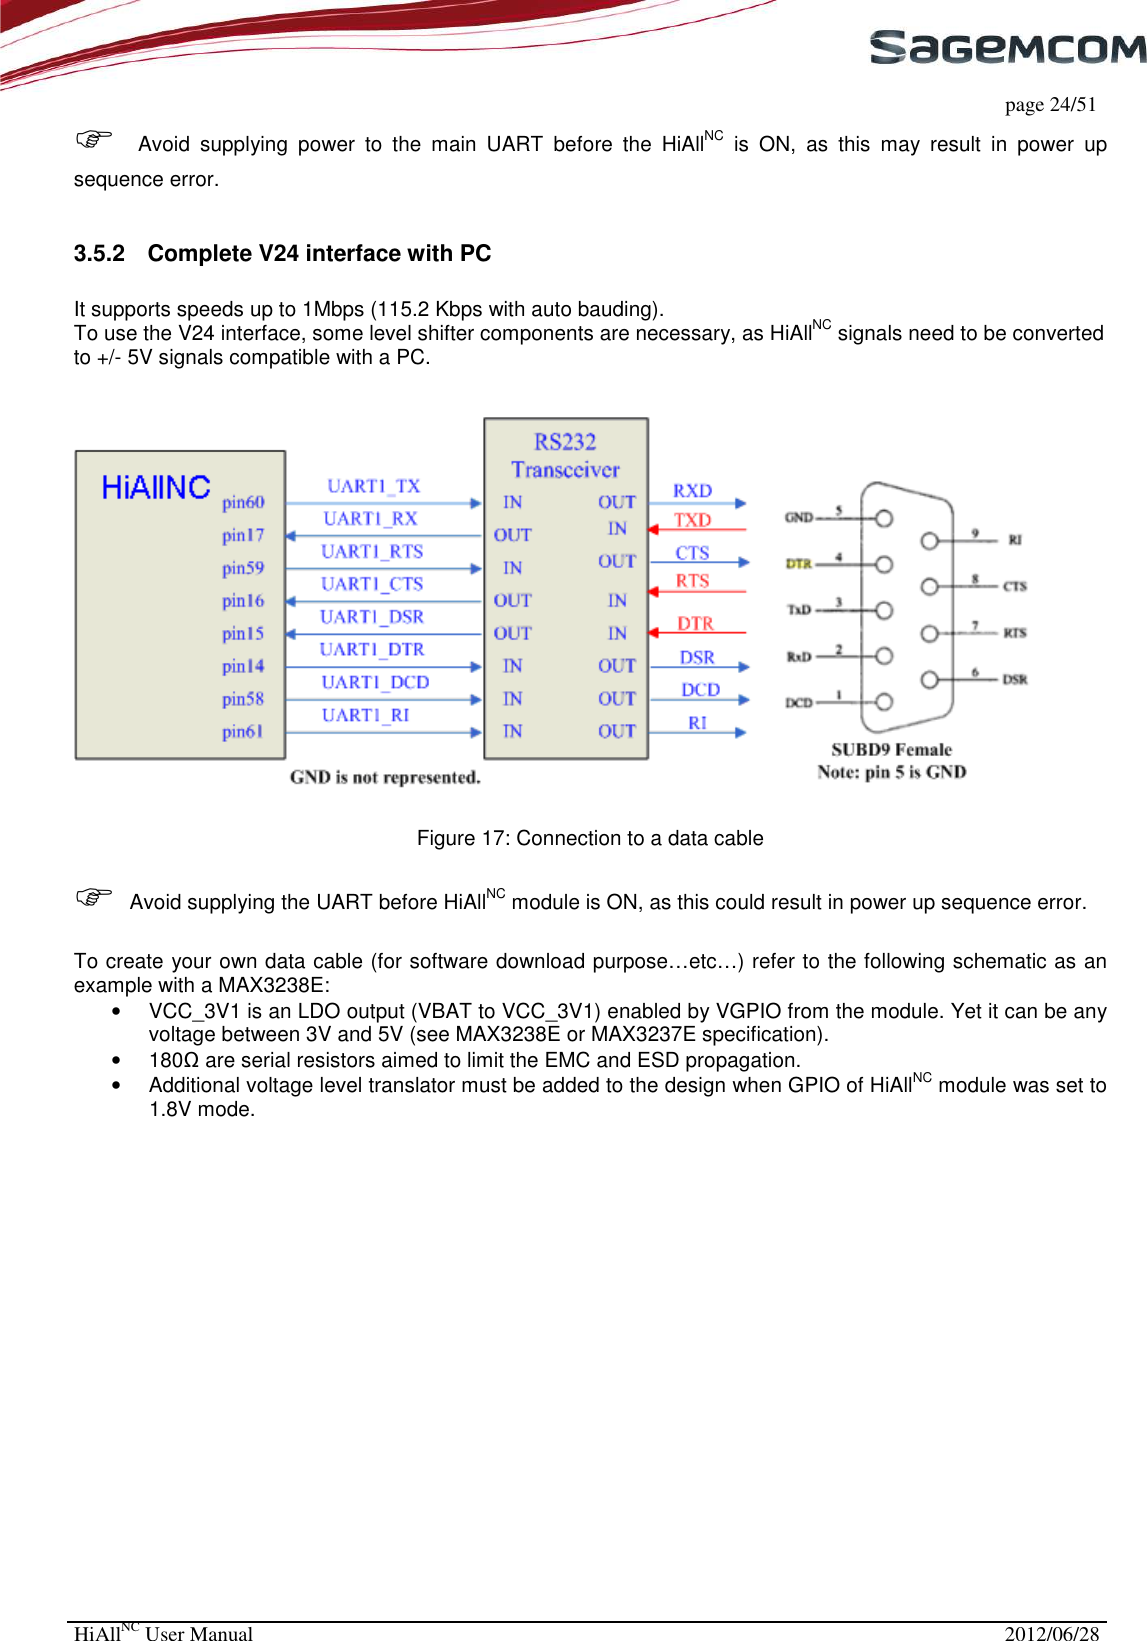     page 24/51 HiAllNC User Manual  2012/06/28   Avoid  supplying  power  to  the  main  UART  before  the  HiAllNC  is  ON,  as  this  may  result  in  power  up sequence error.  3.5.2  Complete V24 interface with PC  It supports speeds up to 1Mbps (115.2 Kbps with auto bauding). To use the V24 interface, some level shifter components are necessary, as HiAllNC signals need to be converted to +/- 5V signals compatible with a PC.     Figure 17: Connection to a data cable   Avoid supplying the UART before HiAllNC module is ON, as this could result in power up sequence error.  To create your own data cable (for software download purpose…etc…) refer to the following schematic as an example with a MAX3238E:   •  VCC_3V1 is an LDO output (VBAT to VCC_3V1) enabled by VGPIO from the module. Yet it can be any voltage between 3V and 5V (see MAX3238E or MAX3237E specification). •  180Ω are serial resistors aimed to limit the EMC and ESD propagation. •  Additional voltage level translator must be added to the design when GPIO of HiAllNC module was set to 1.8V mode. 